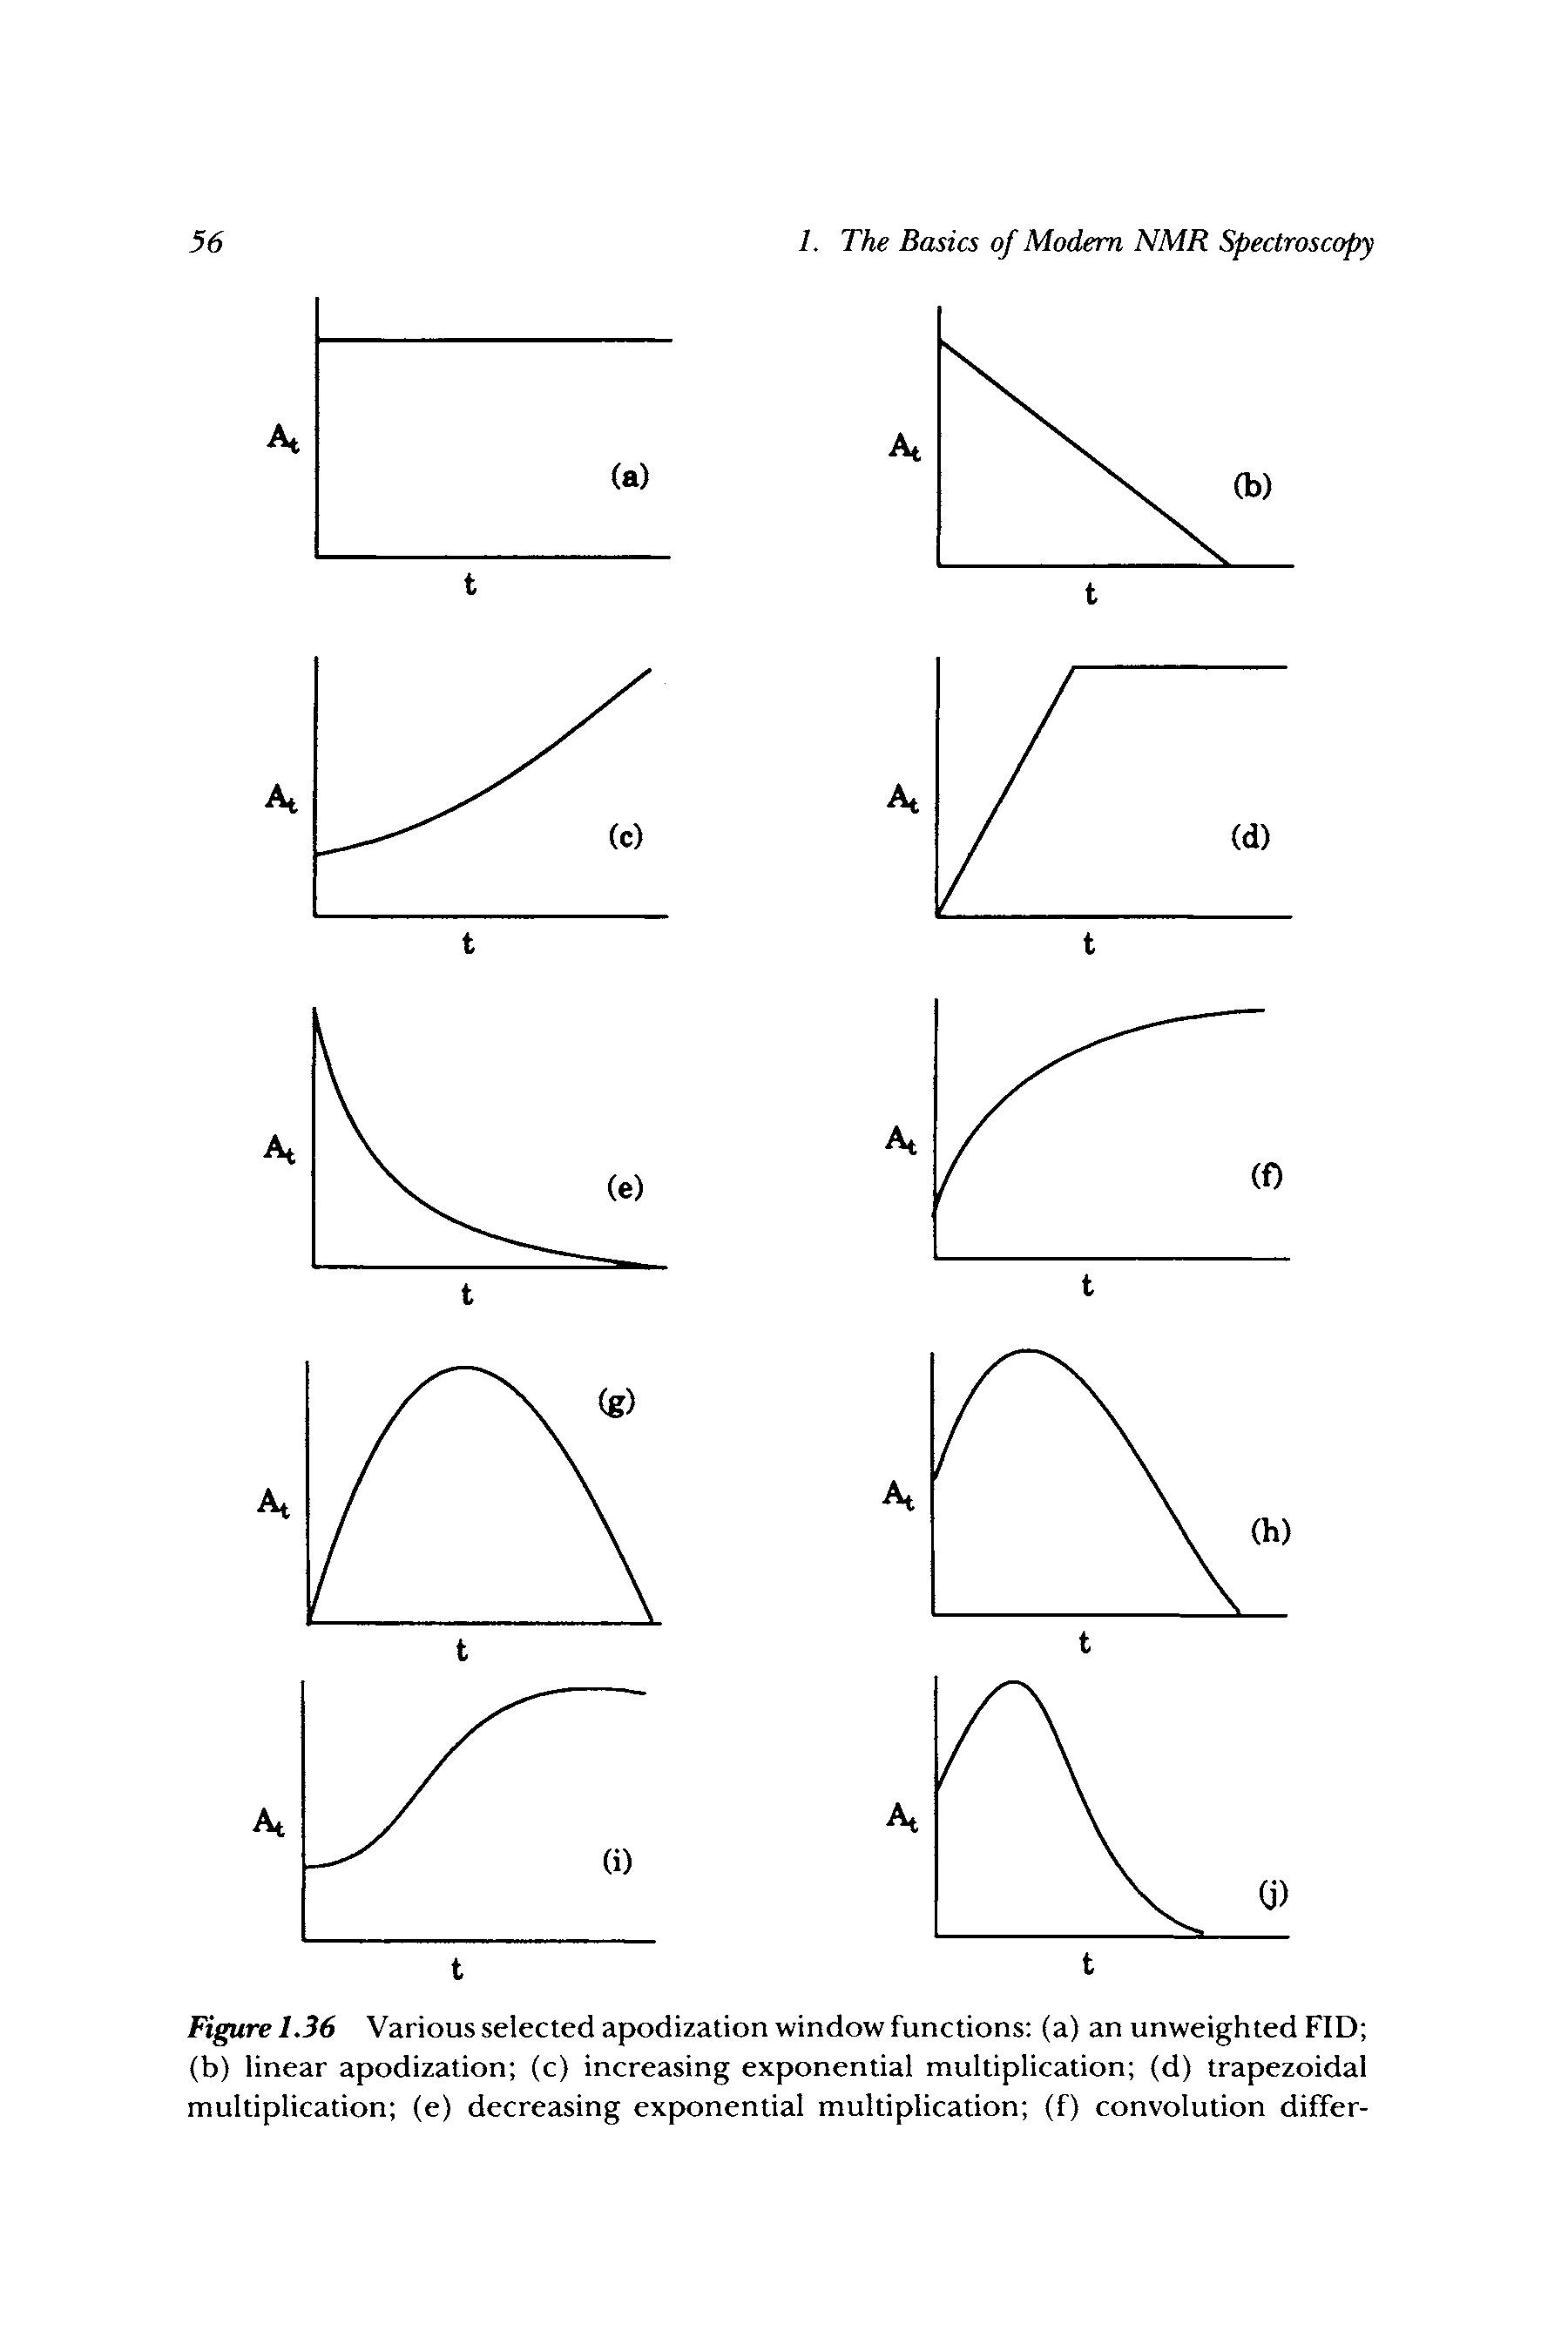 Figure 1.36 Various selected apodization window functions (a) an unweighted FID (b) linear apodization (c) increasing exponential multiplication (d) trapezoidal multiplication (e) decreasing exponential multiplication (f) convolution differ-...